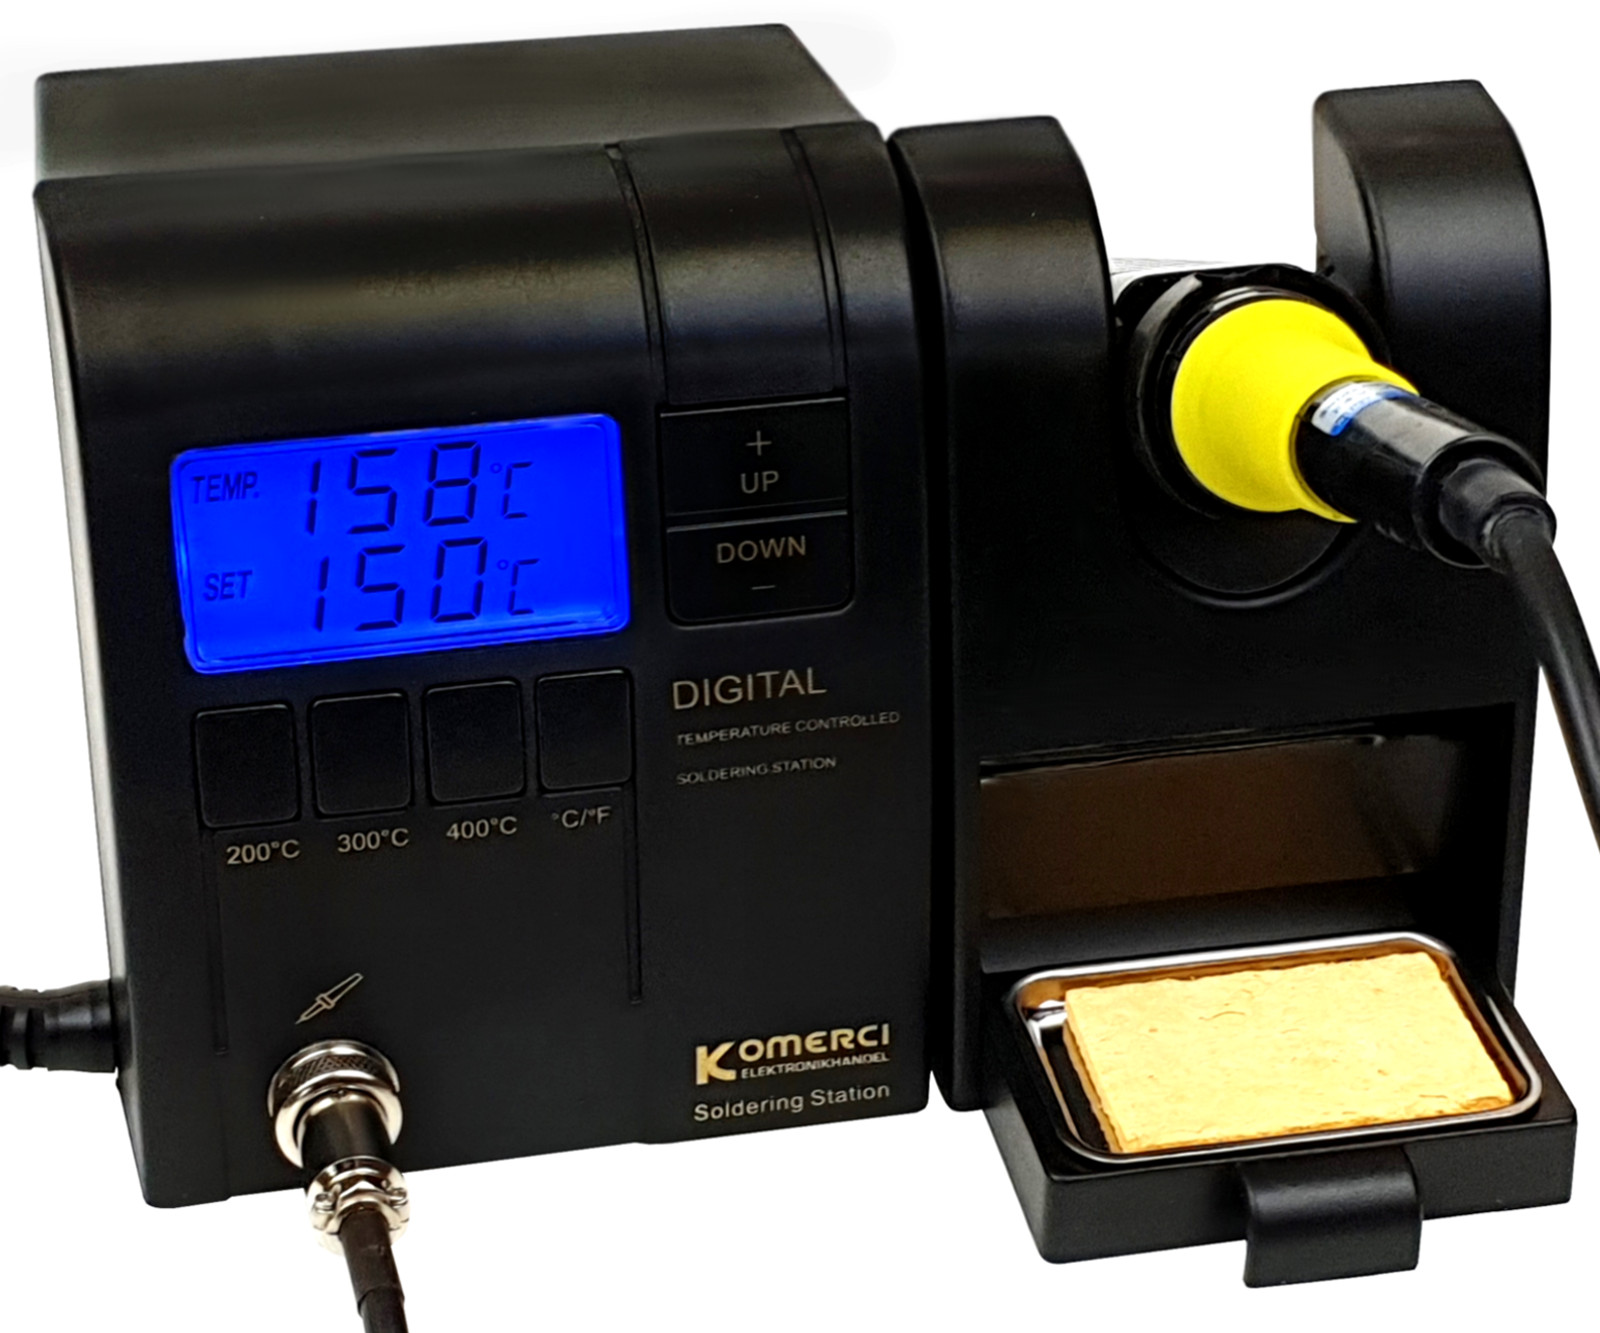 Digital regulated Soldering Station, pre-selction buttons, ESD